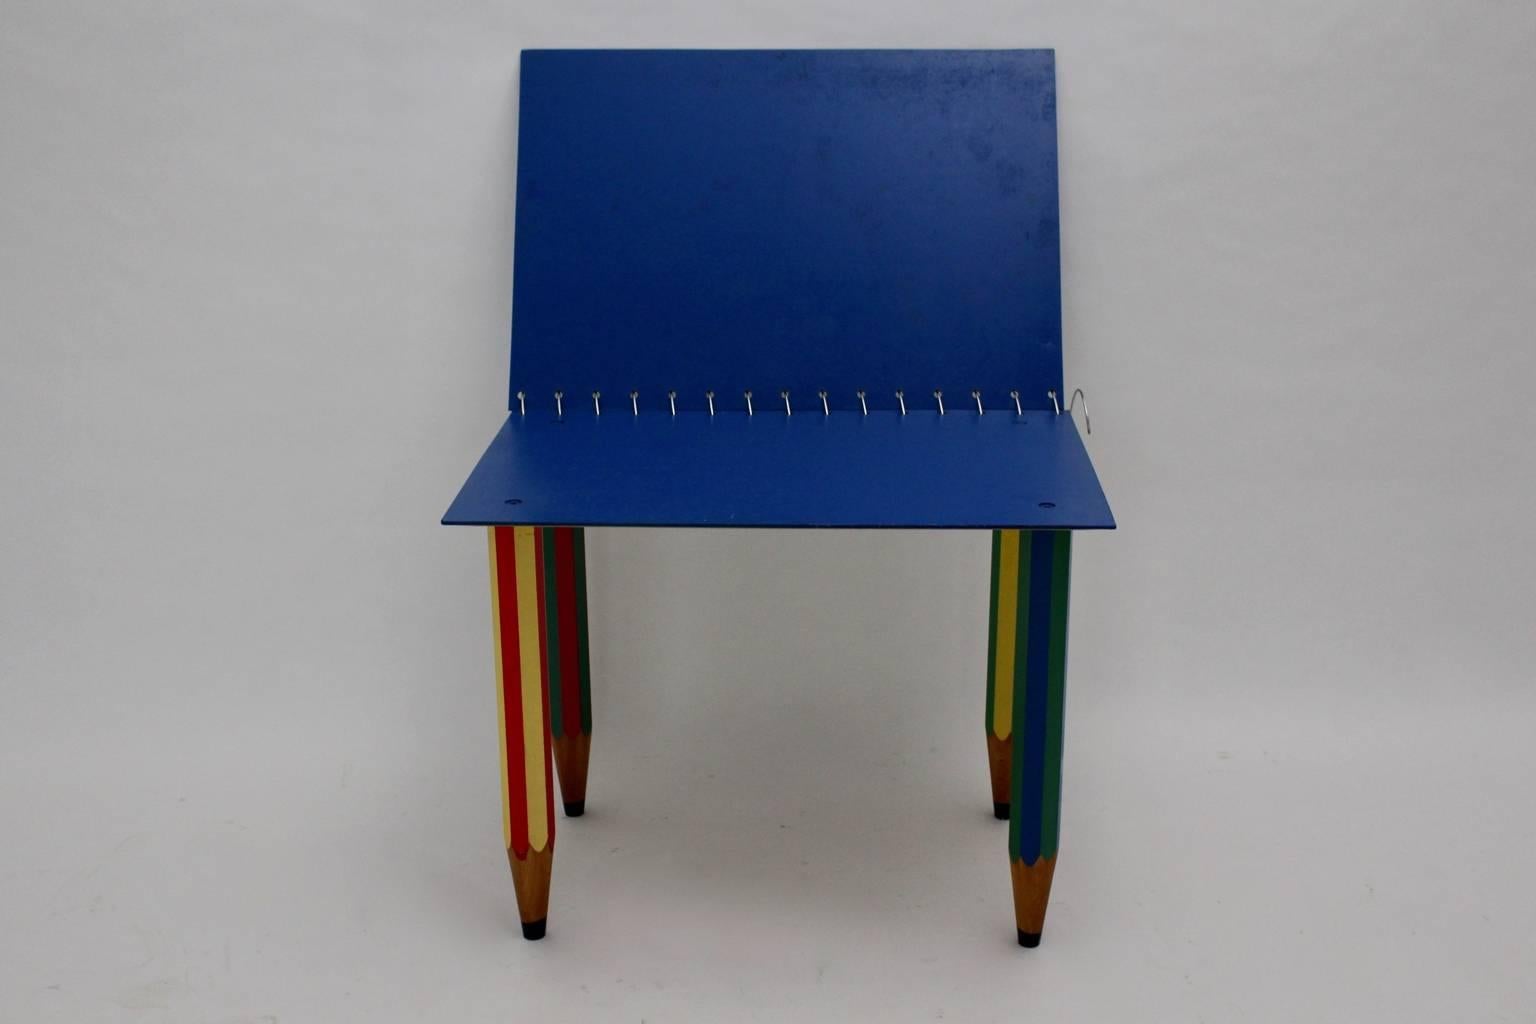 20th Century Multicolored Pop Art Vintage Desk or Writing Table by Pierre Sala 1983